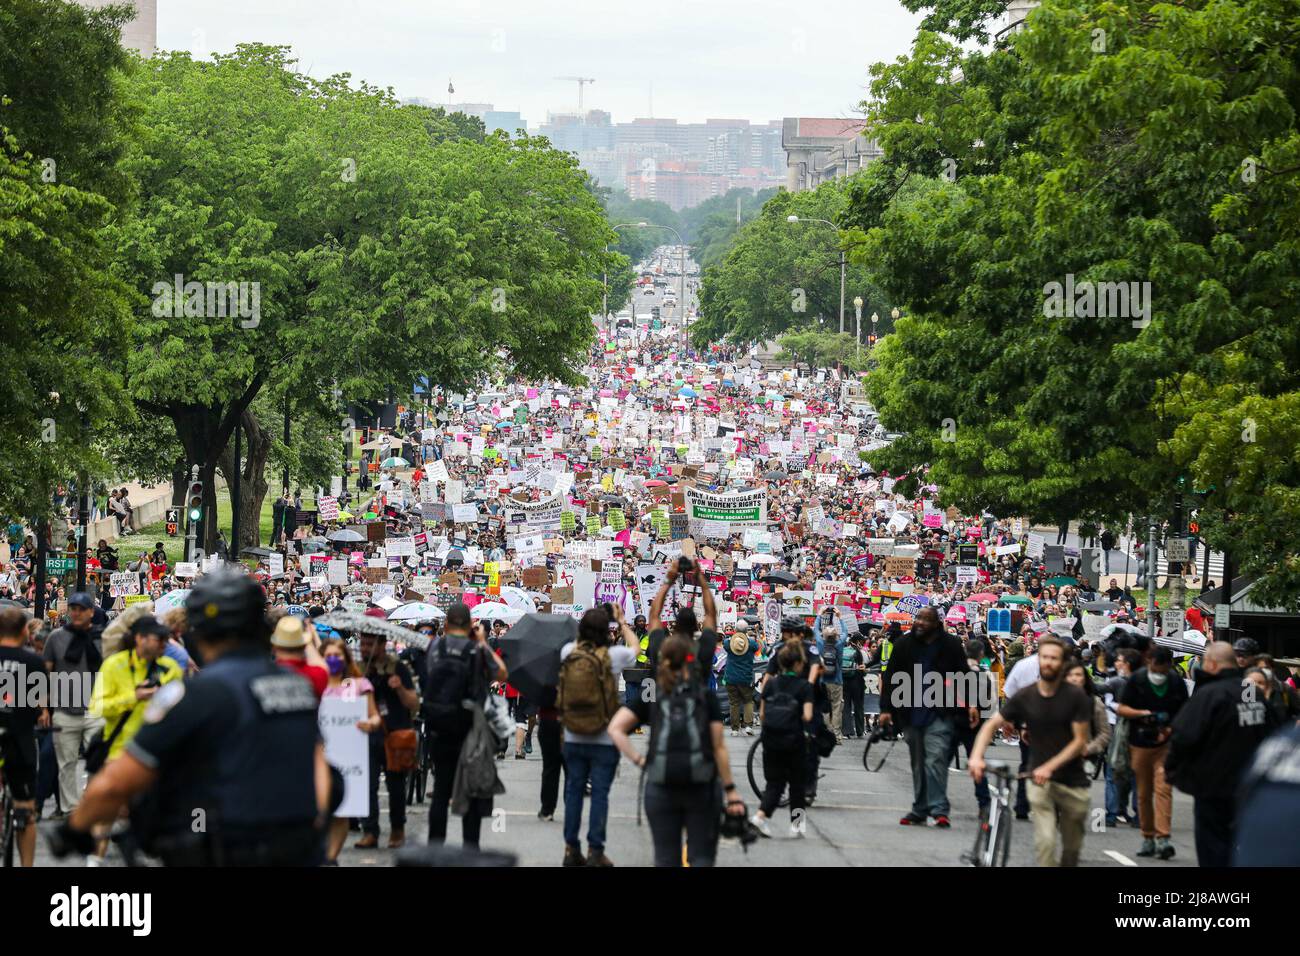 Protestors march in Washington D.C. as part of the “Bans Off Our Bodies” protests in support of abortion rights on Saturday, May 14, 2022. The protest was part of a nationwide series of protests in favor of abortion rights after a draft decision of the United States Supreme Court leaked which seemed to indicate that the Roe v. Wade decision which established a women’s right to abortion may be in danger of being overturned. Stock Photo